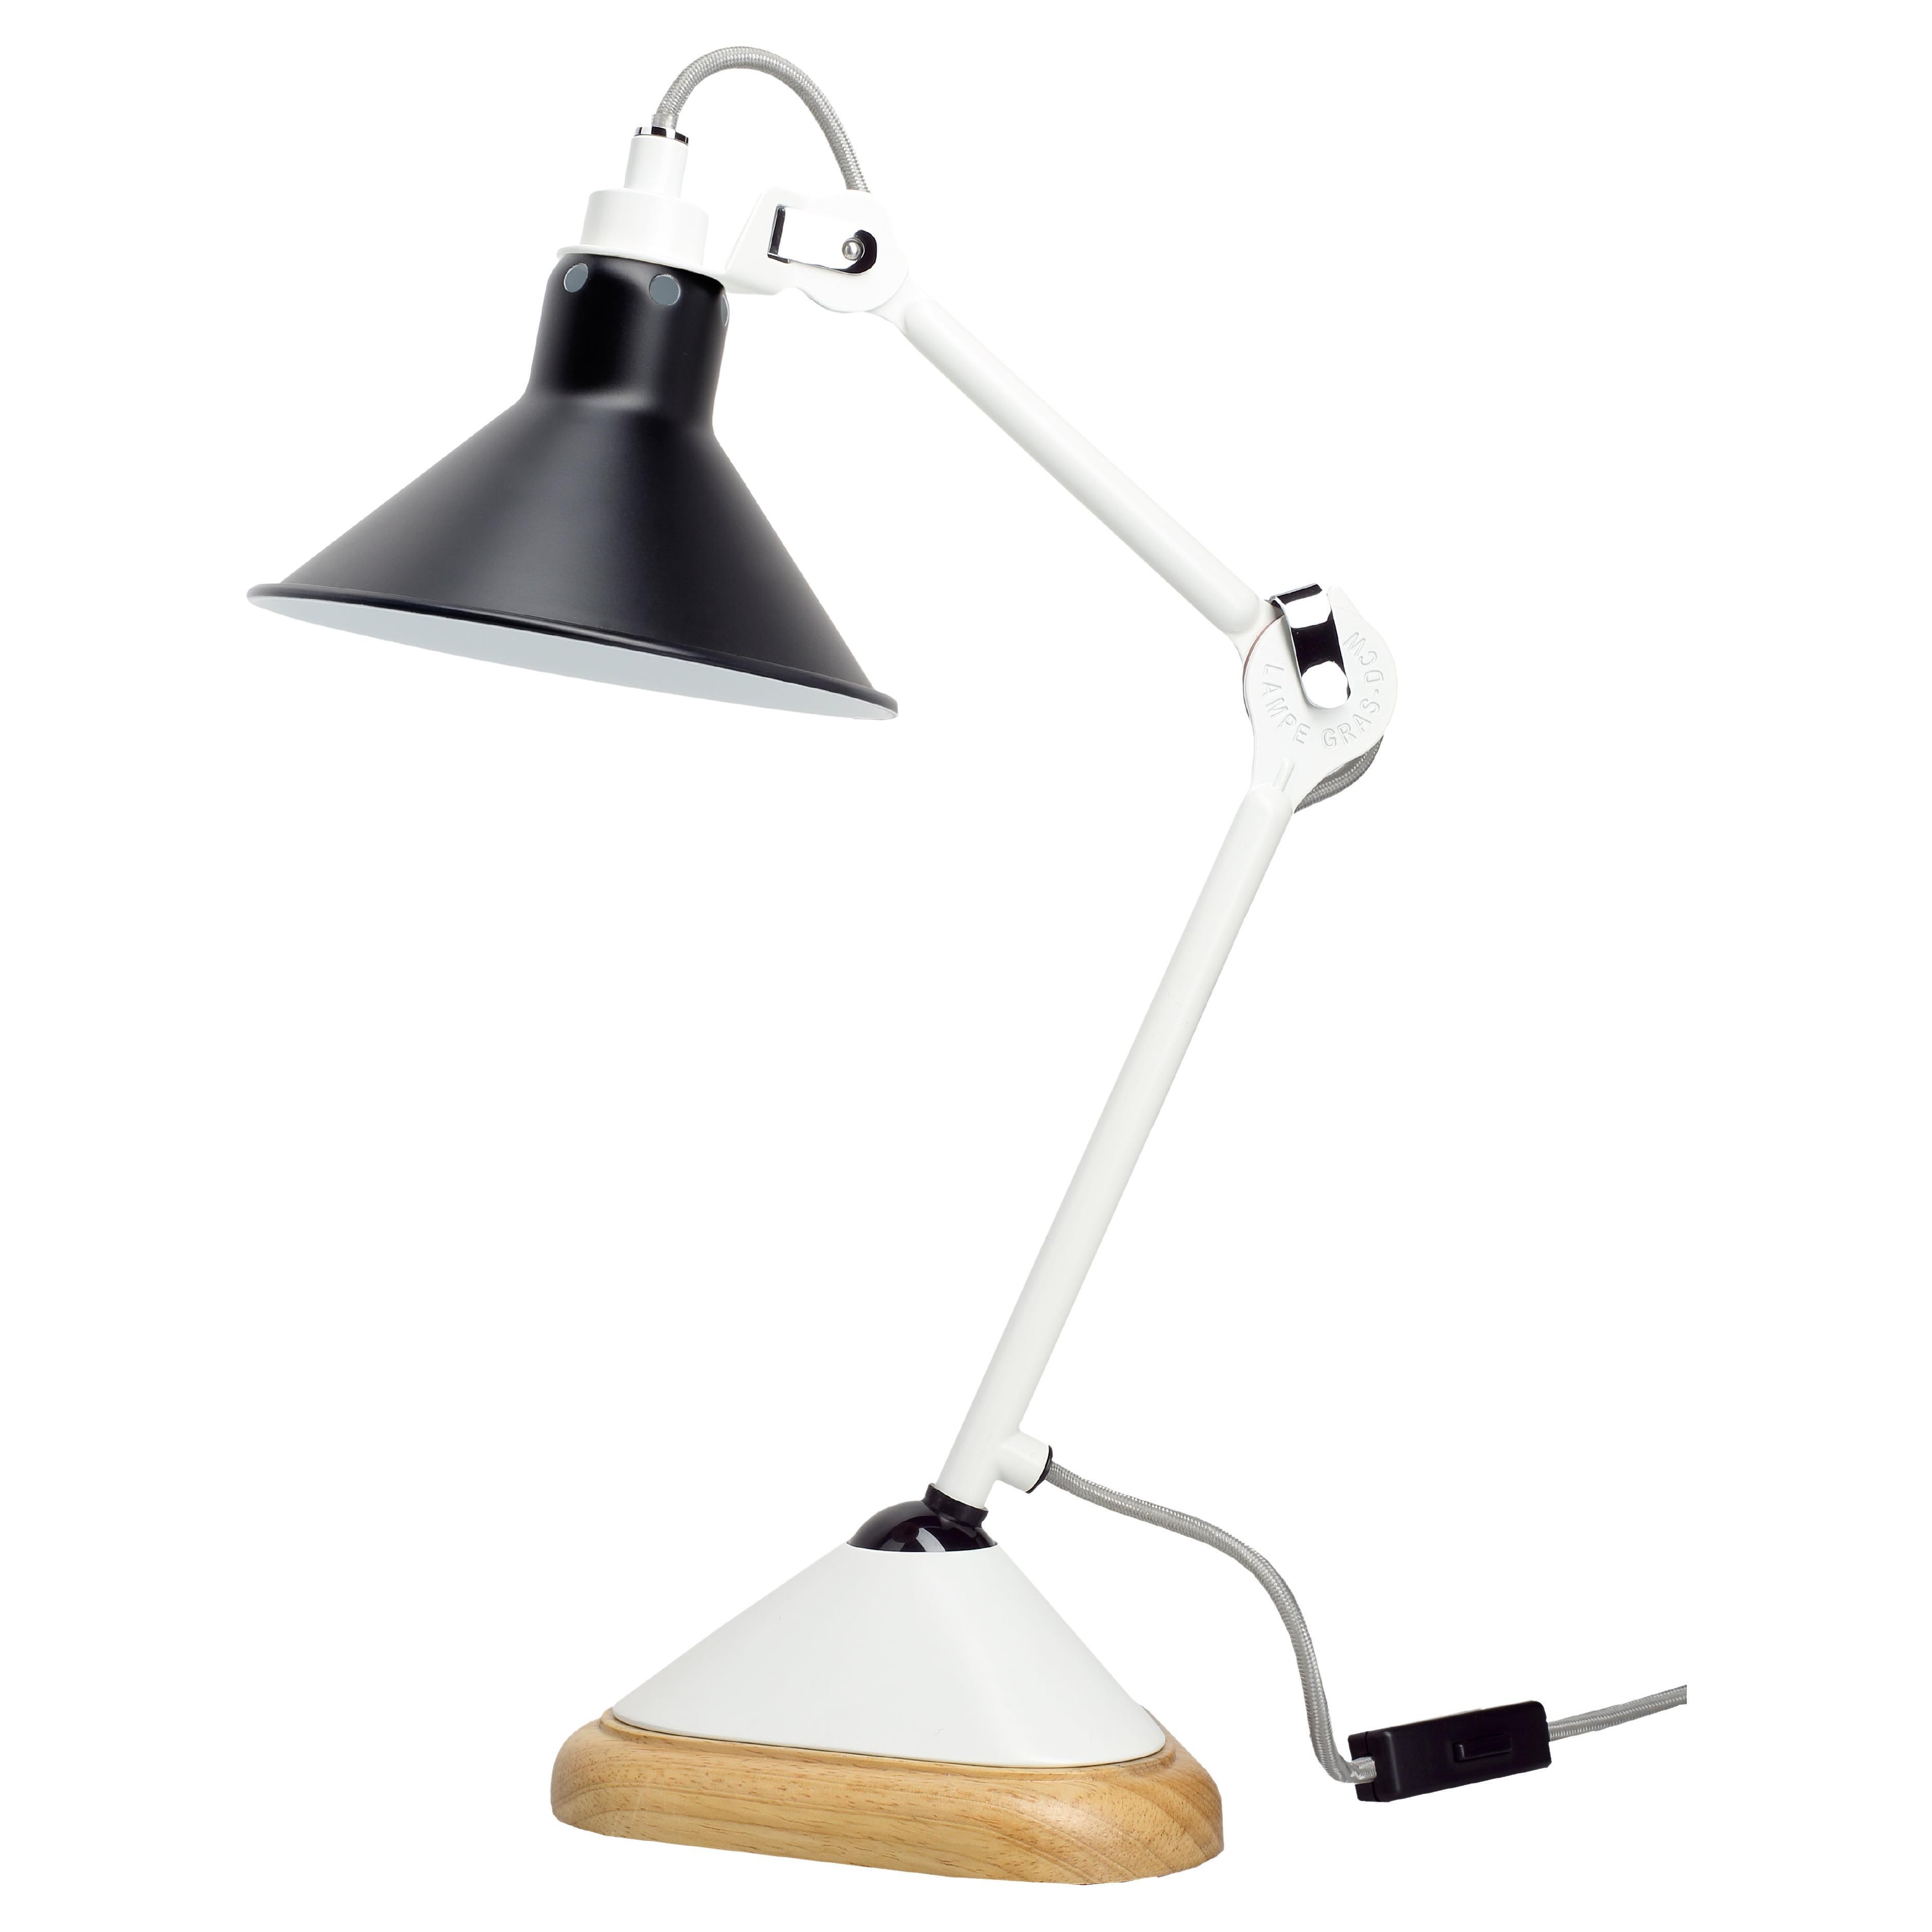 DCW Editions La Lampe Gras N°207 Conic Table Lamp in White Arm with Black Shade